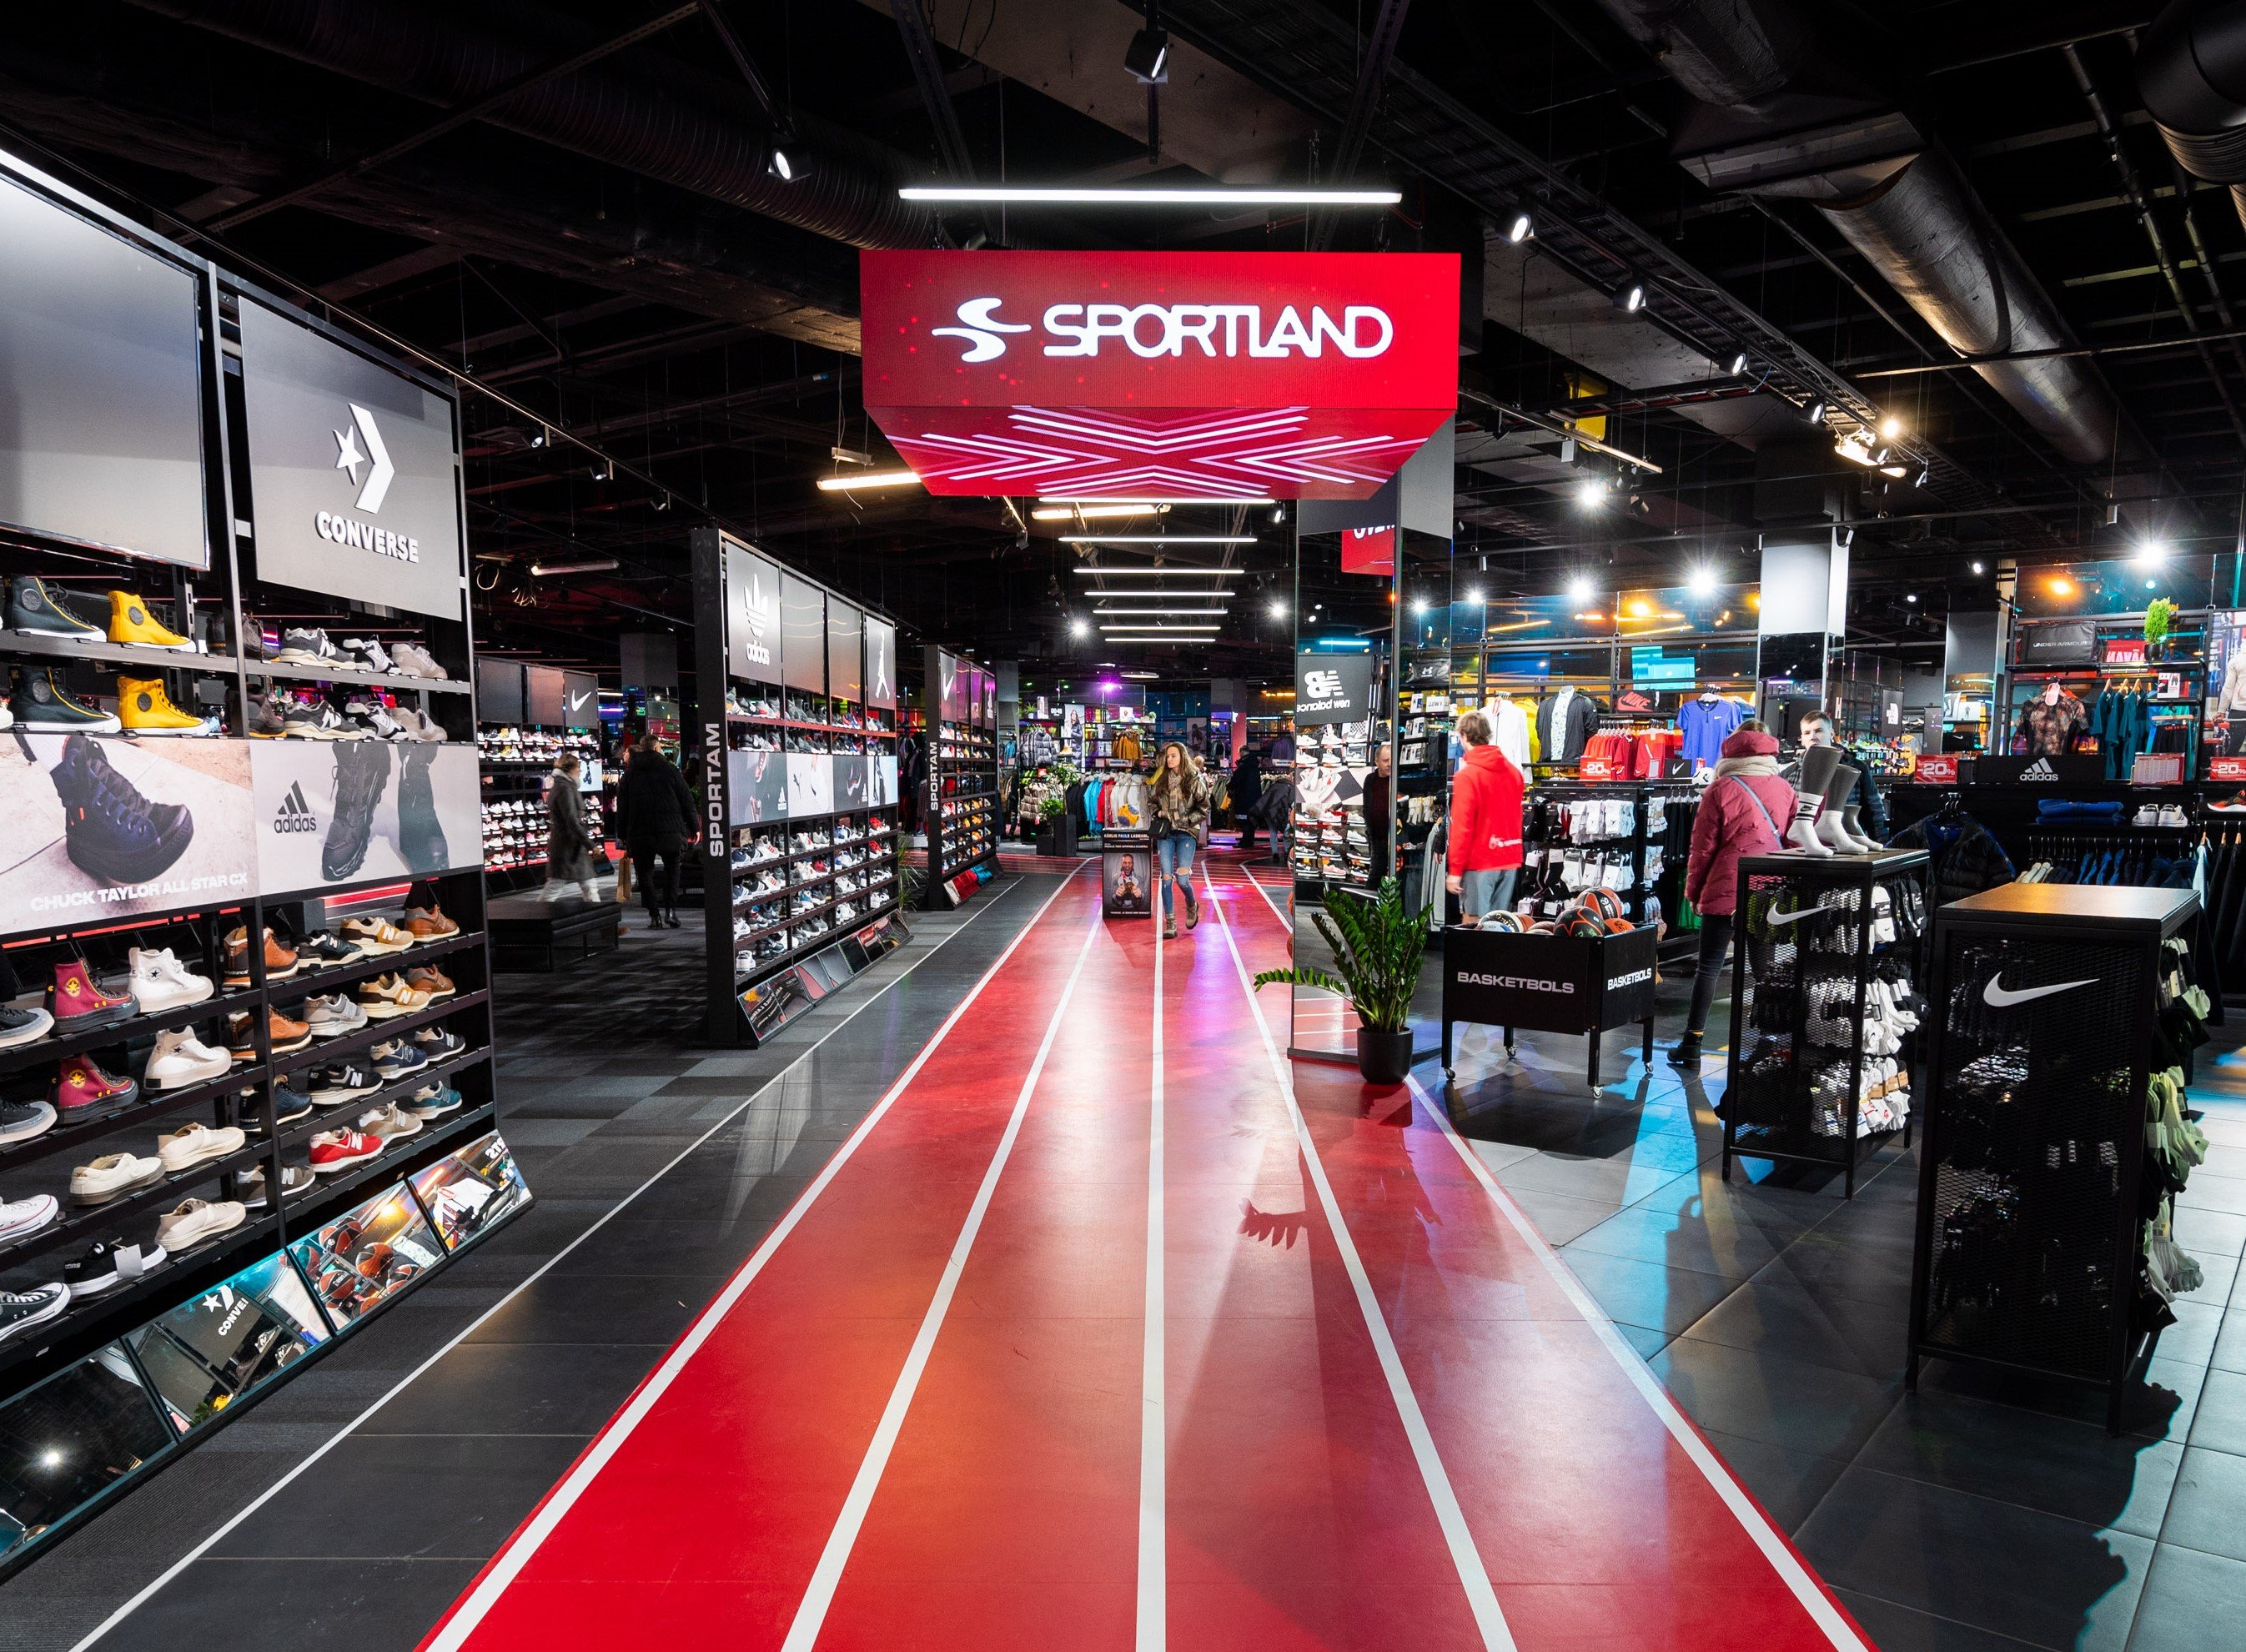 The largest "Sportland" store in Latvia has opened in the "Spice" shopping centre